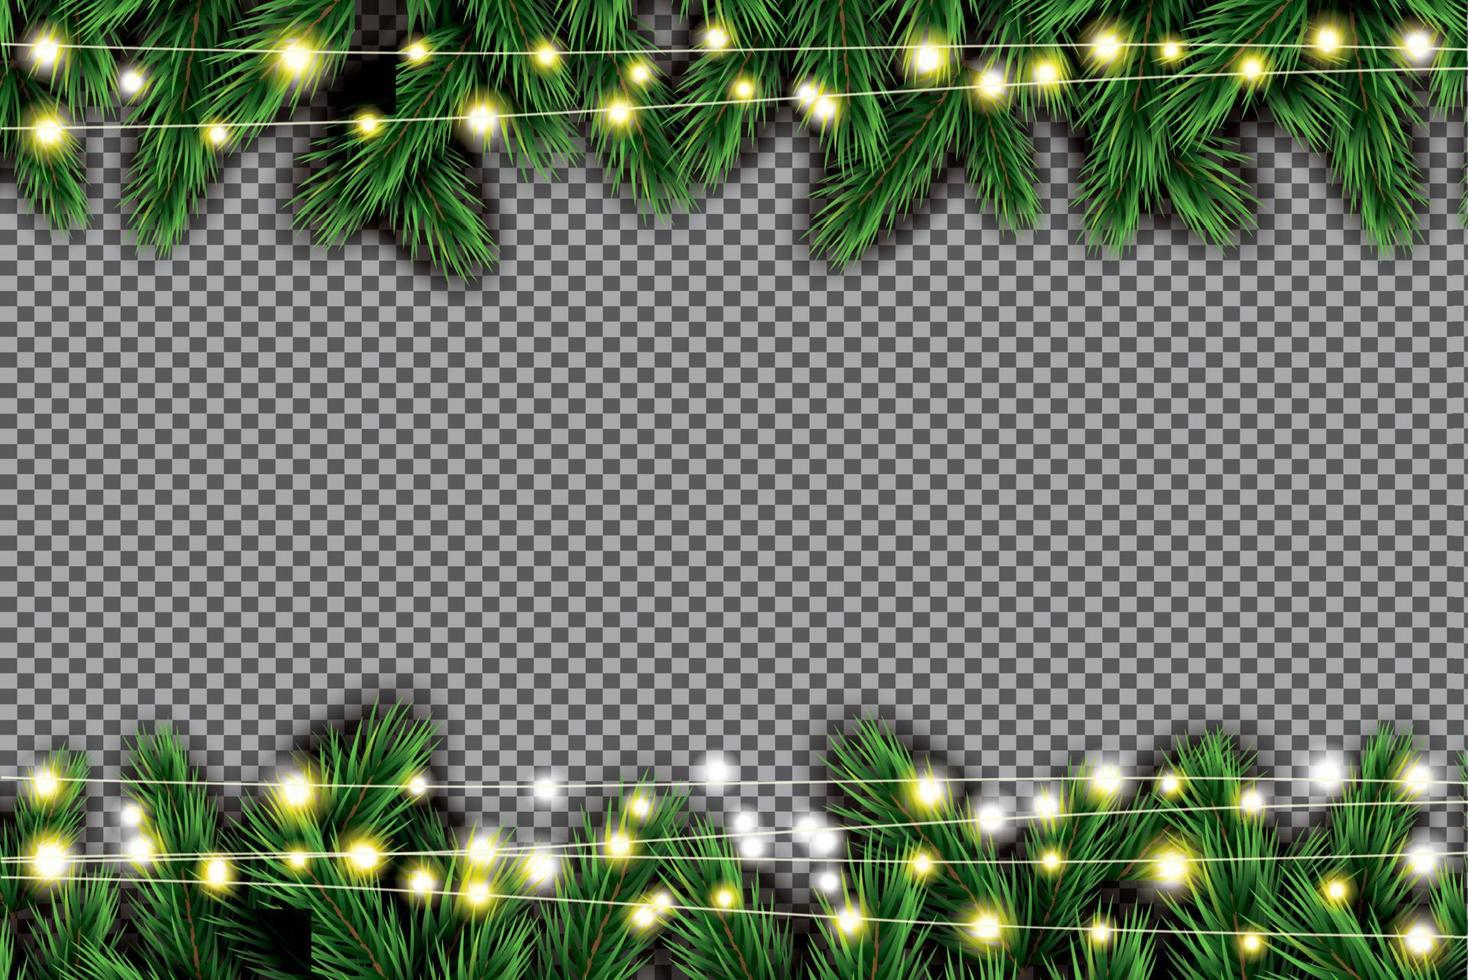 Fir Branch with Neon Lights on Transparent Background. vector